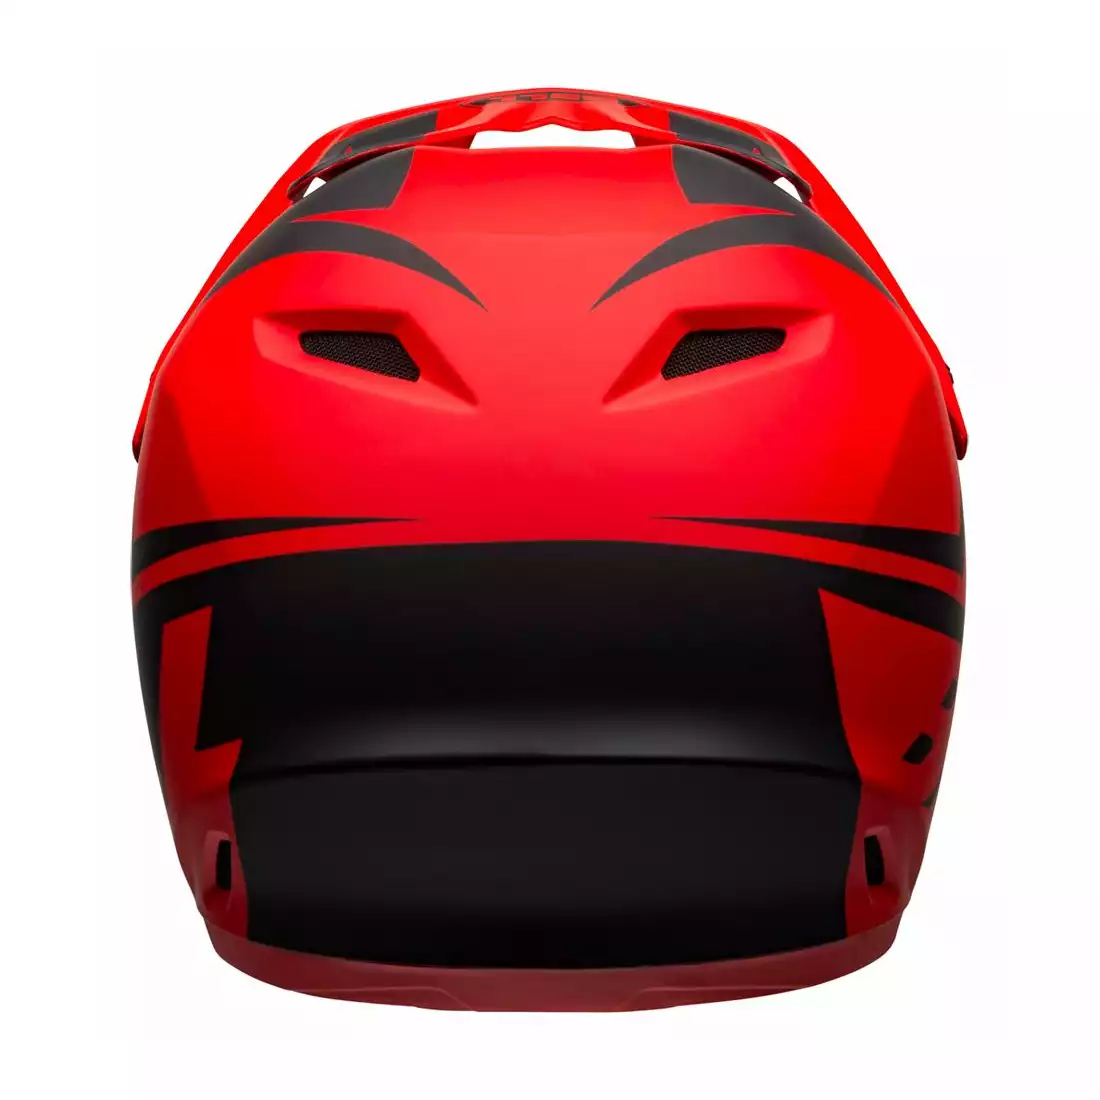 Kask rowerowy full face BELL TRANSFER matte red black 